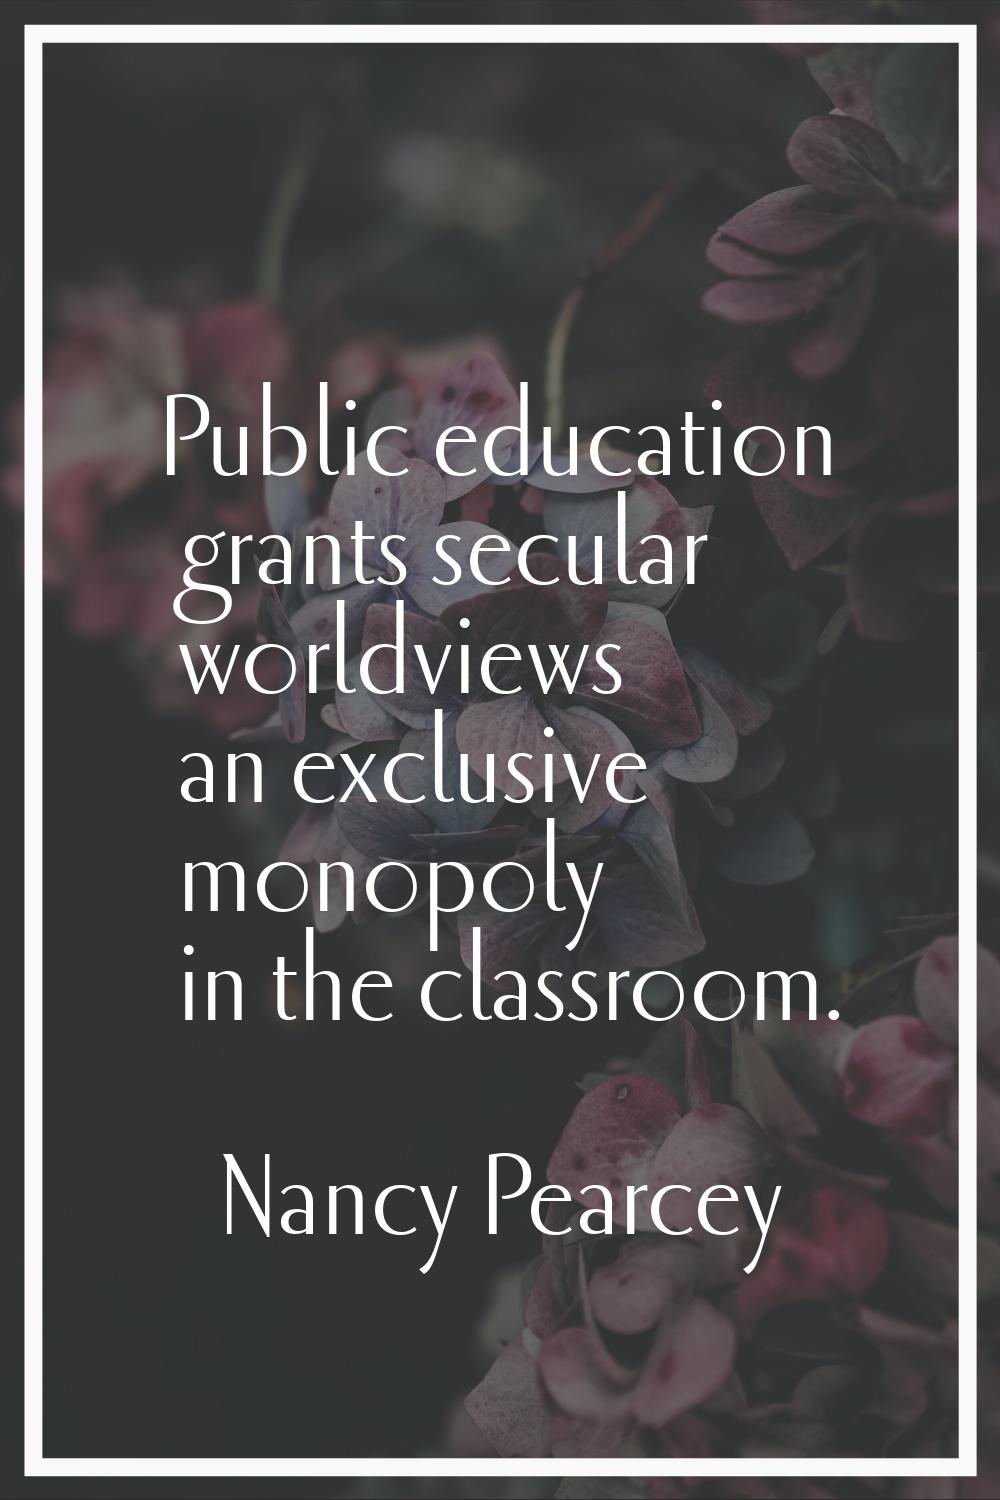 Public education grants secular worldviews an exclusive monopoly in the classroom.